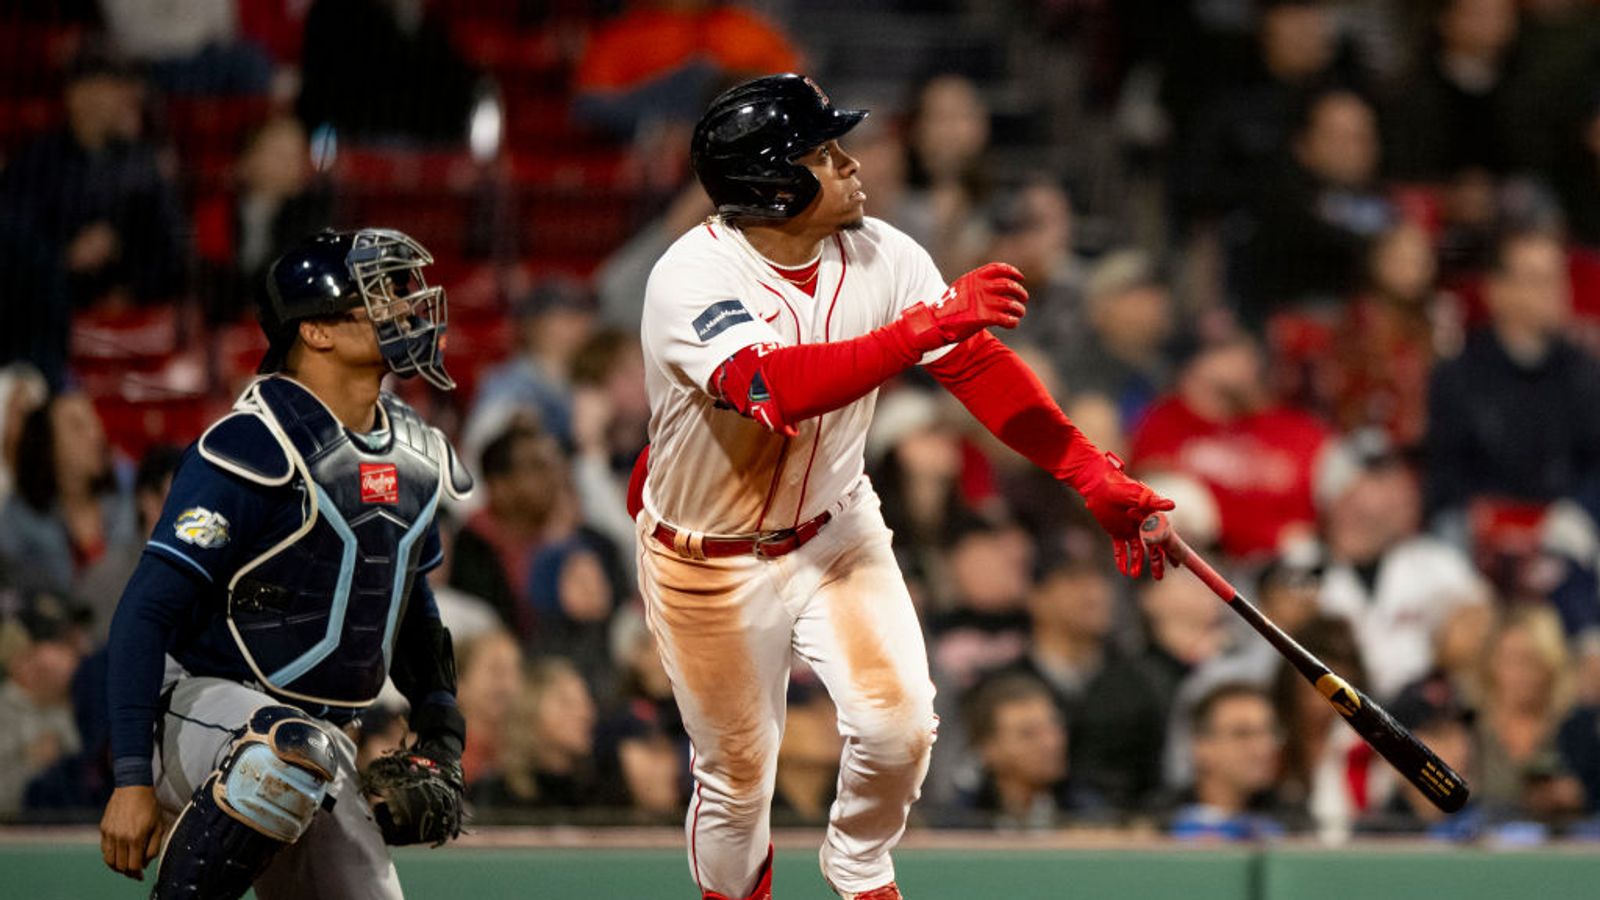 The Red Sox should give Tanner Houck the opportunity to close games